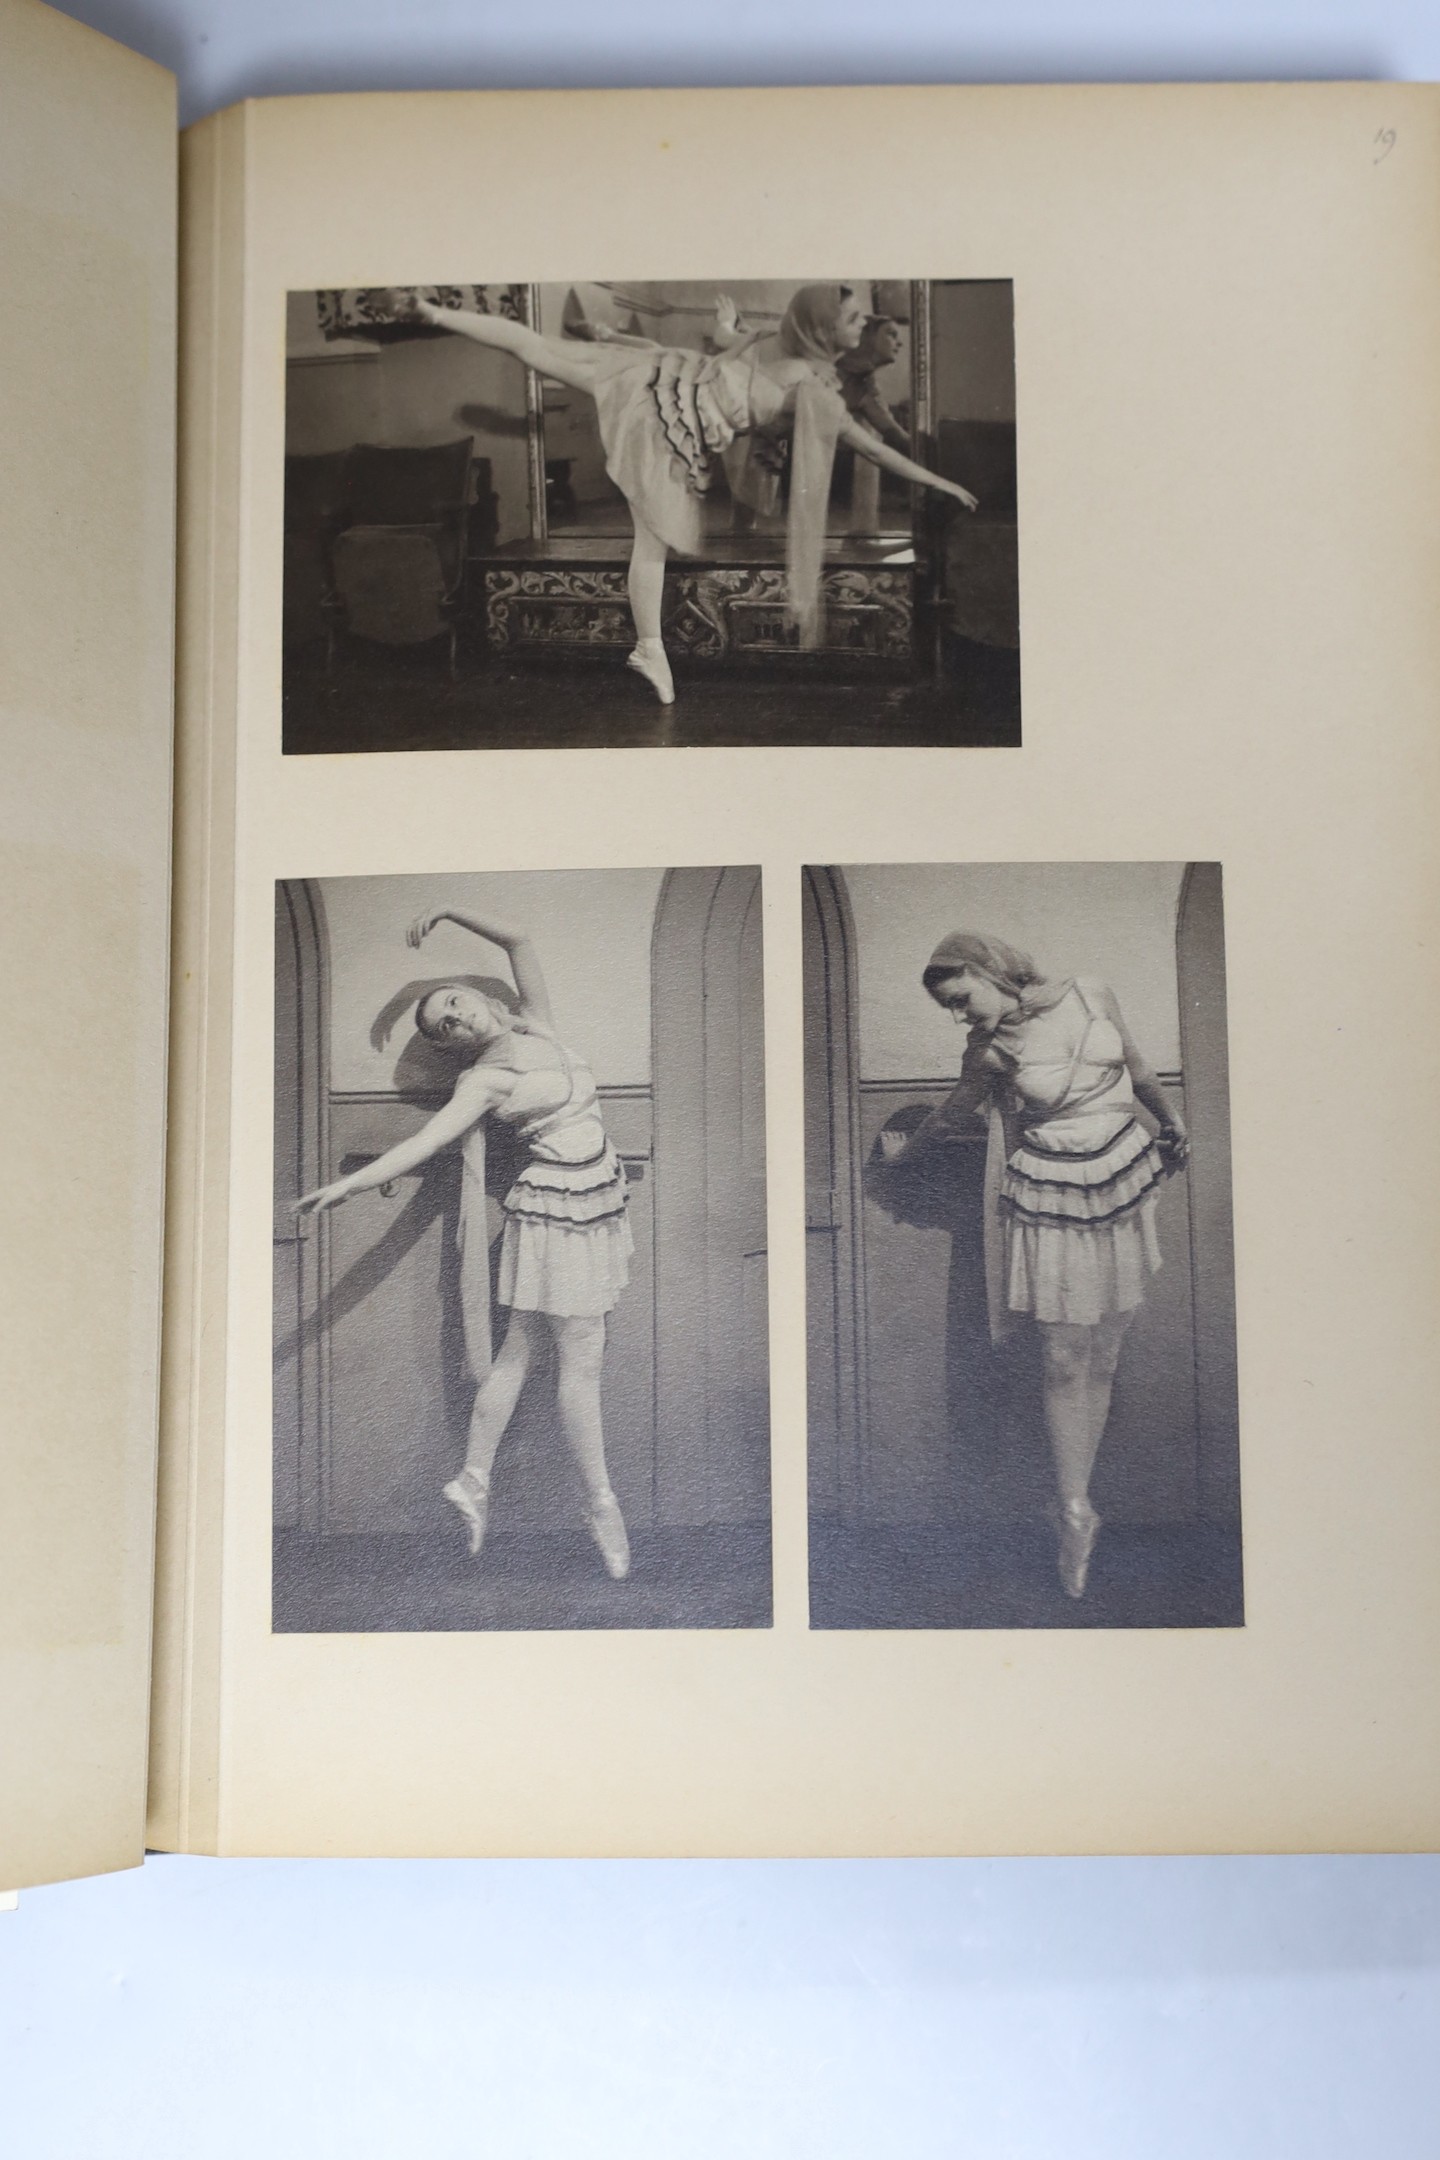 An interesting collection of photography relating to the Royal ballet, Margot Fonteyn etc